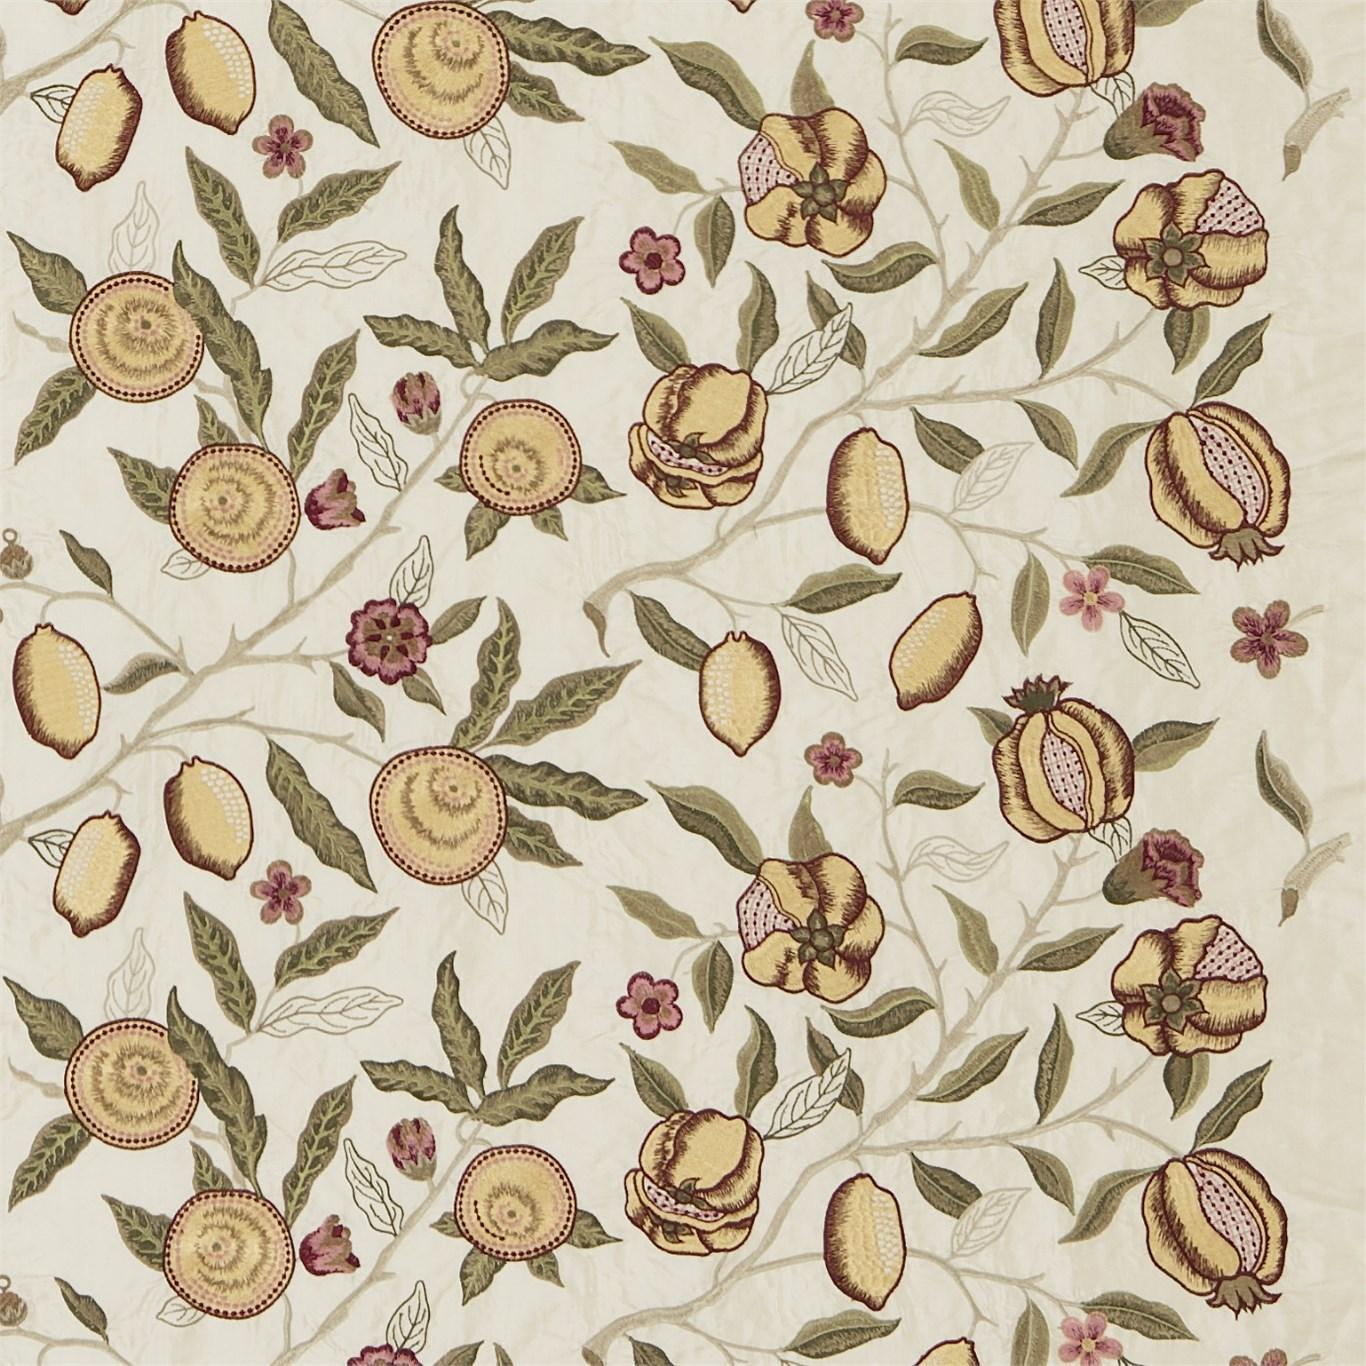 William Morris Embroidery Patterns William Morris Co Fruit Embroidery Fabric Dmoefr304